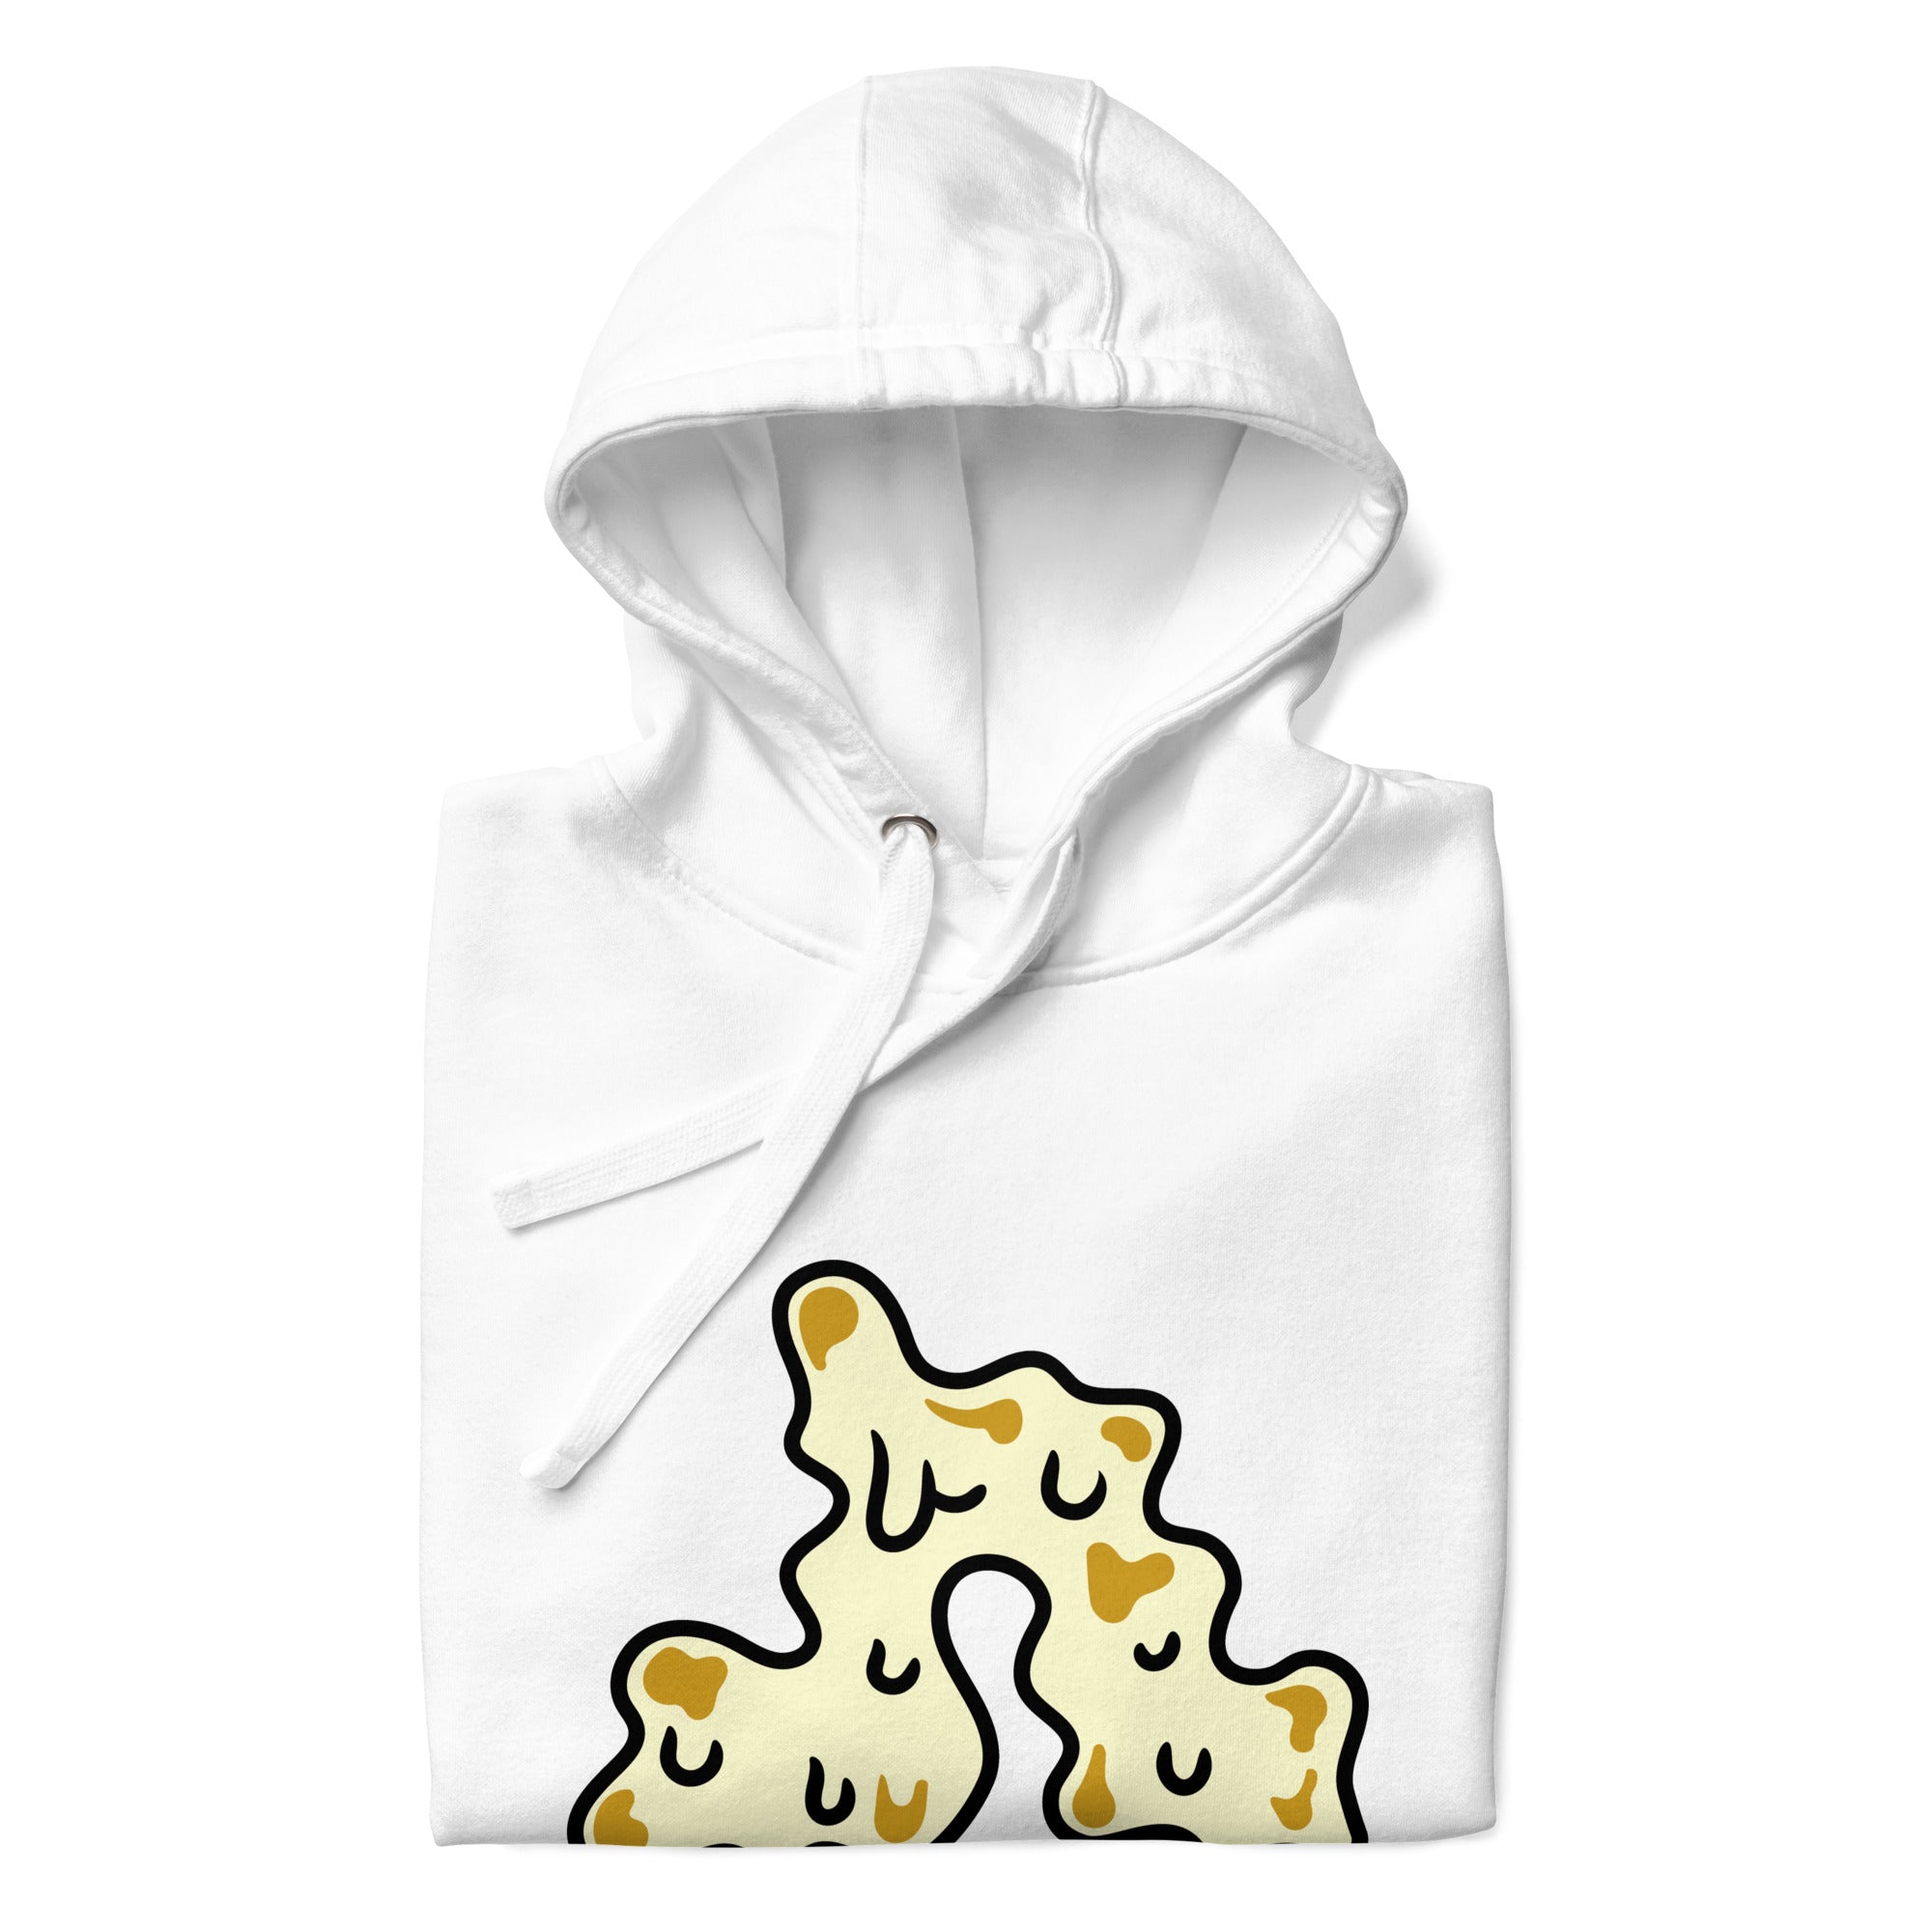 PURE Solo hoodie white, goldenrod and white.